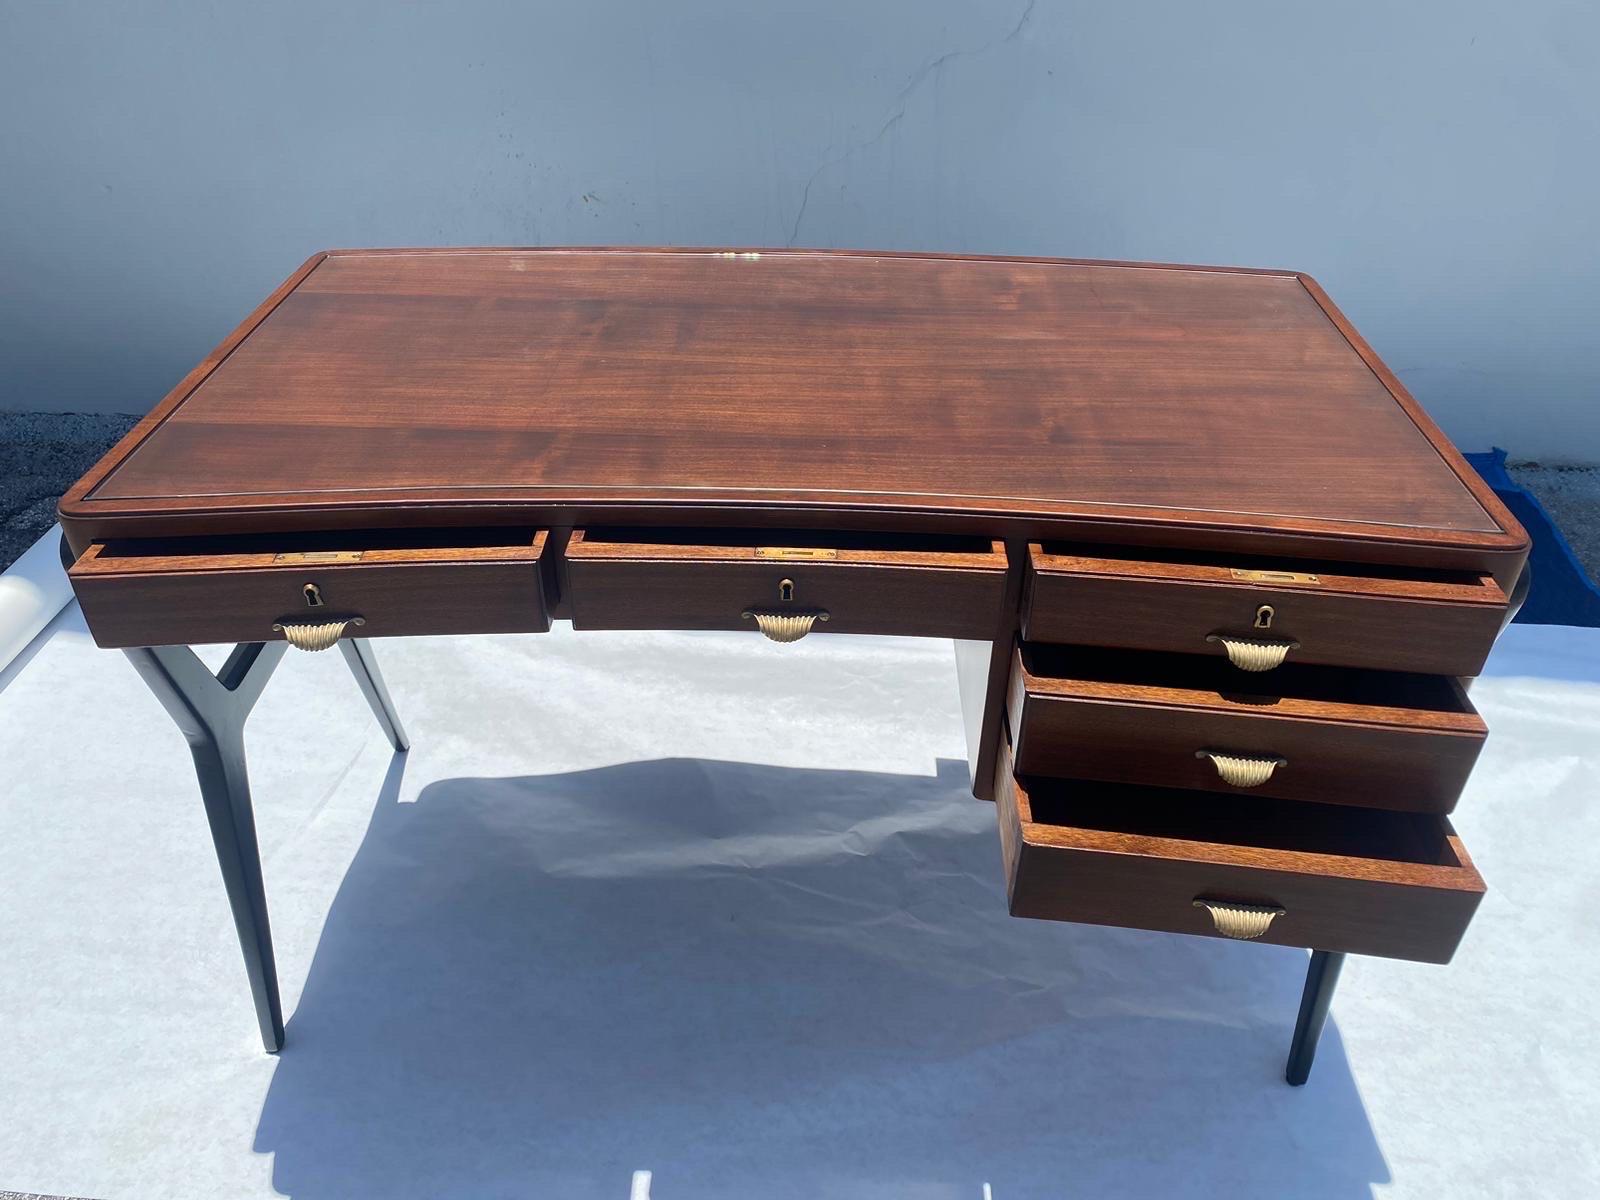 Truly OUTSTANDING slightly curved Italian desk with sculptural legs and brass pulls (original desk key).  The beautiful Walnut plateau has been restored and new glass top blotter.  It is beautiful from ALL sides and great scale.  THIS ITEM IS